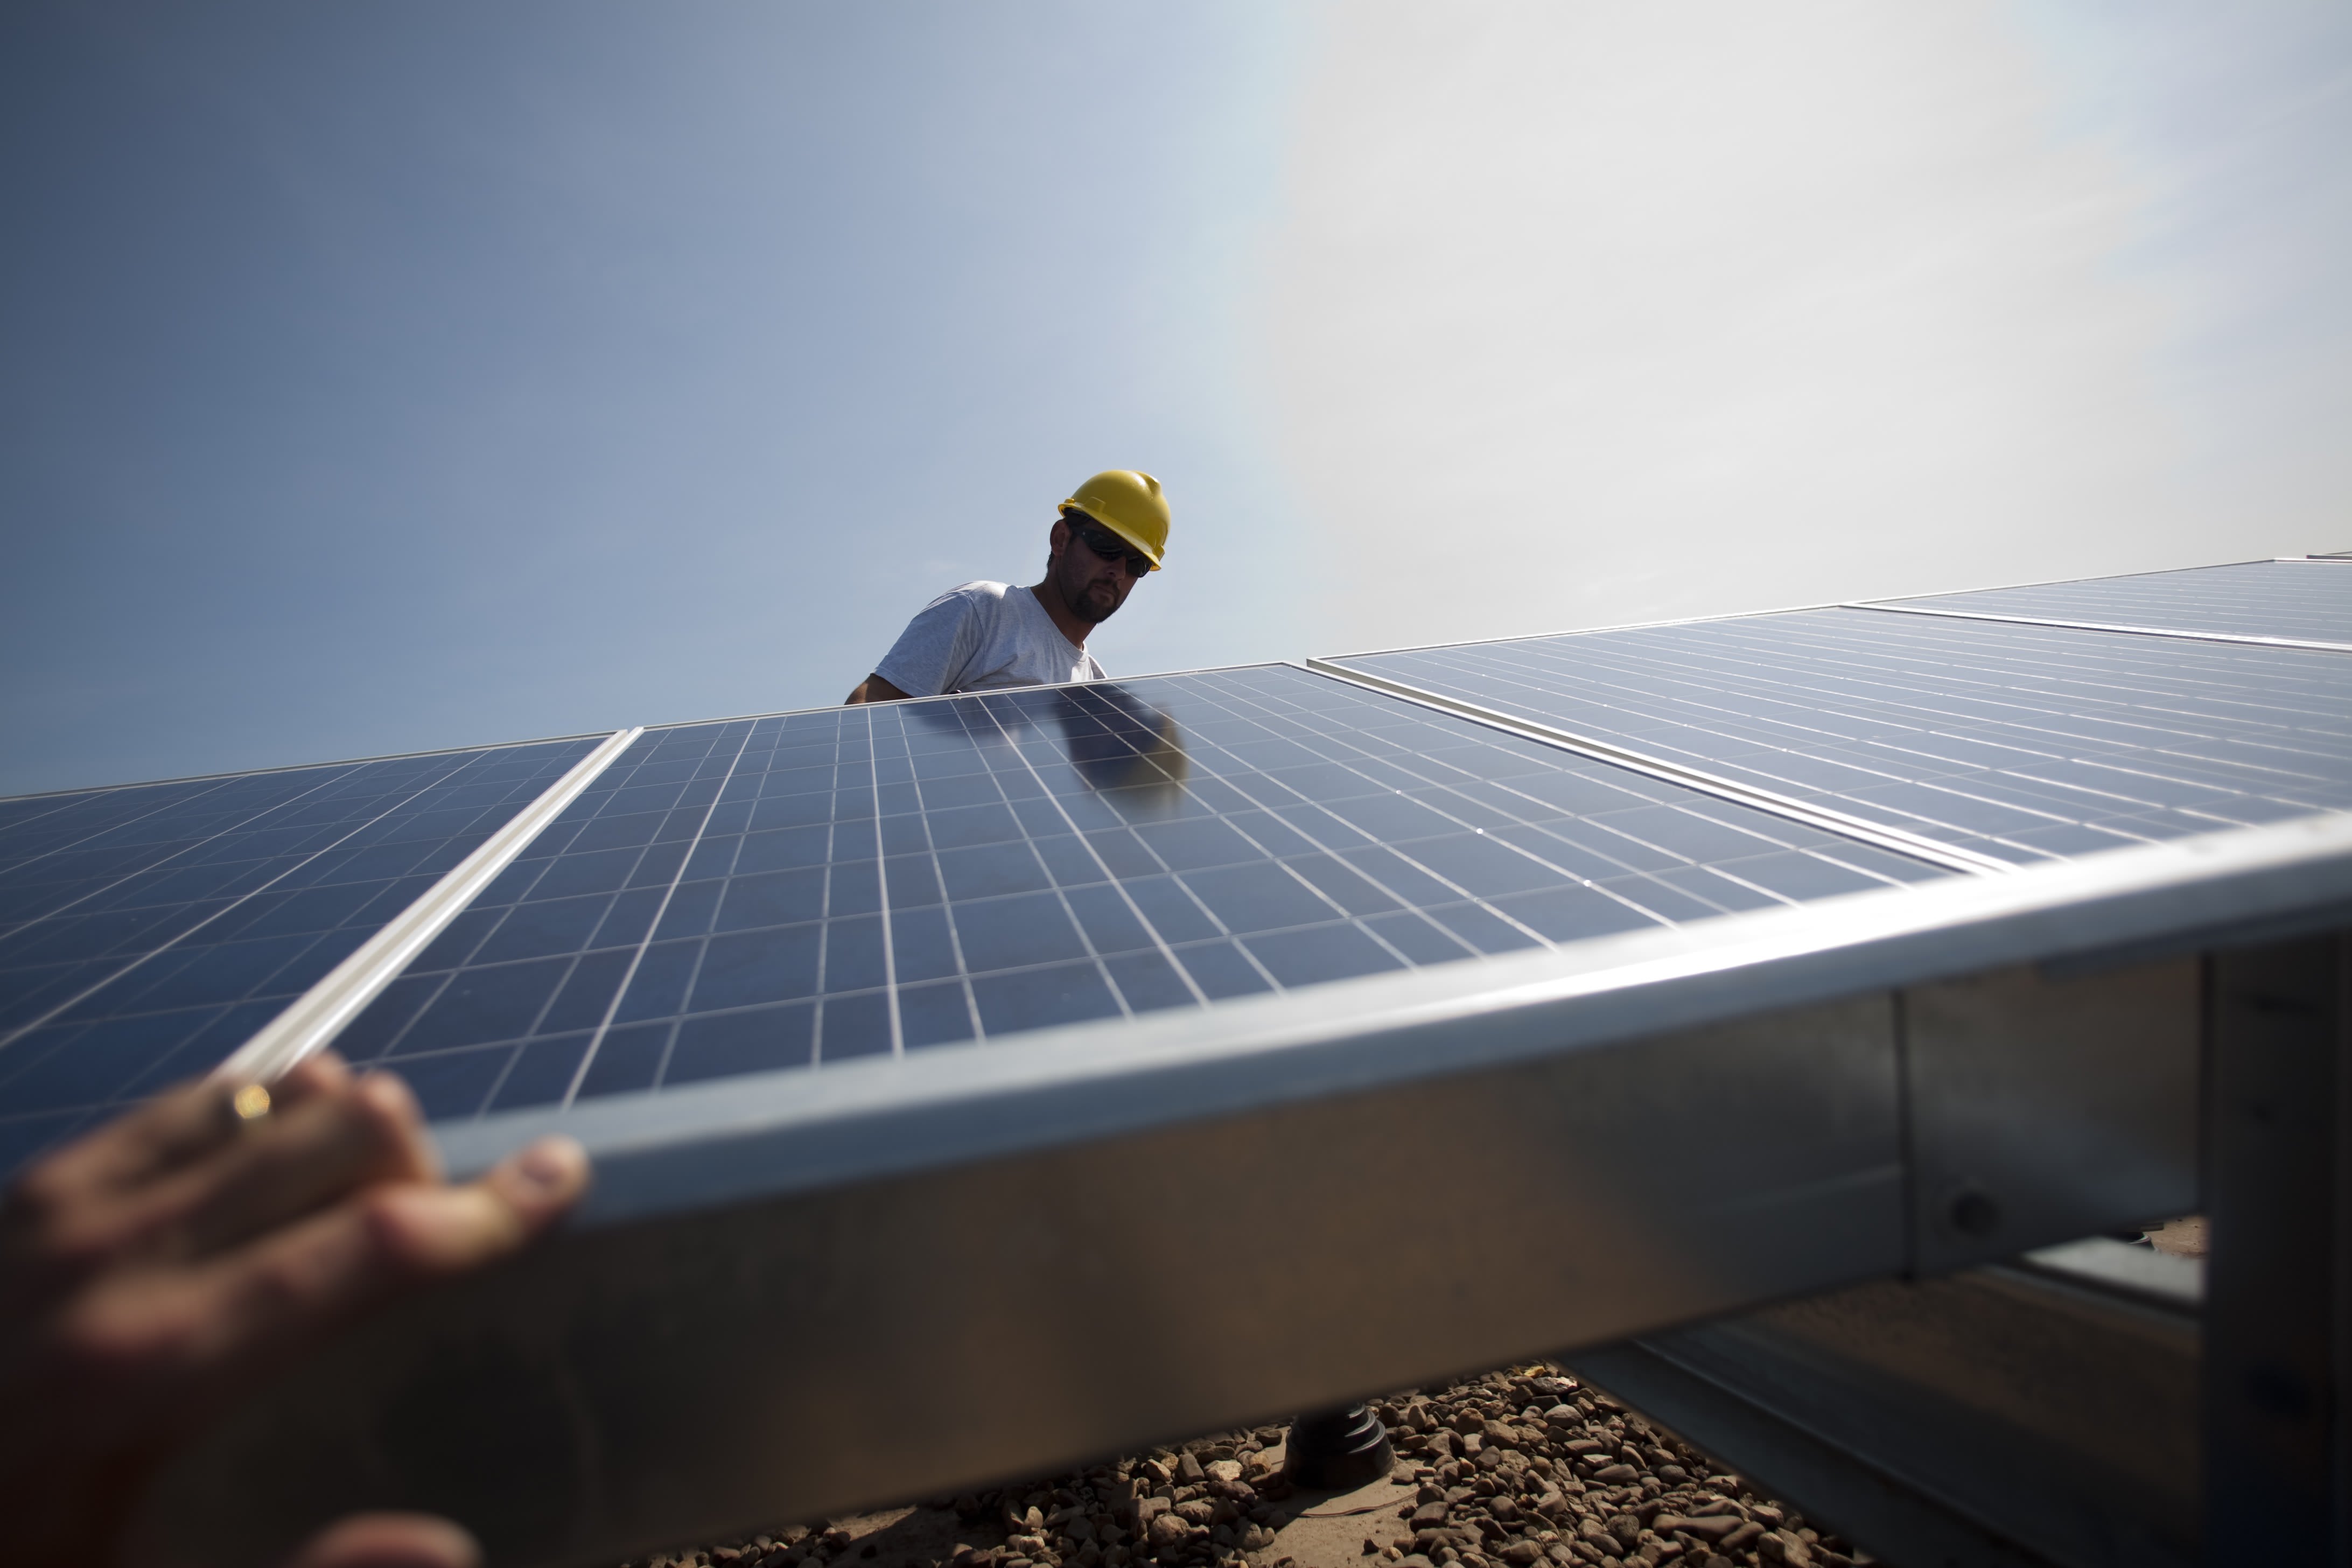 US solar jobs have risen 167% since 2010, new data shows